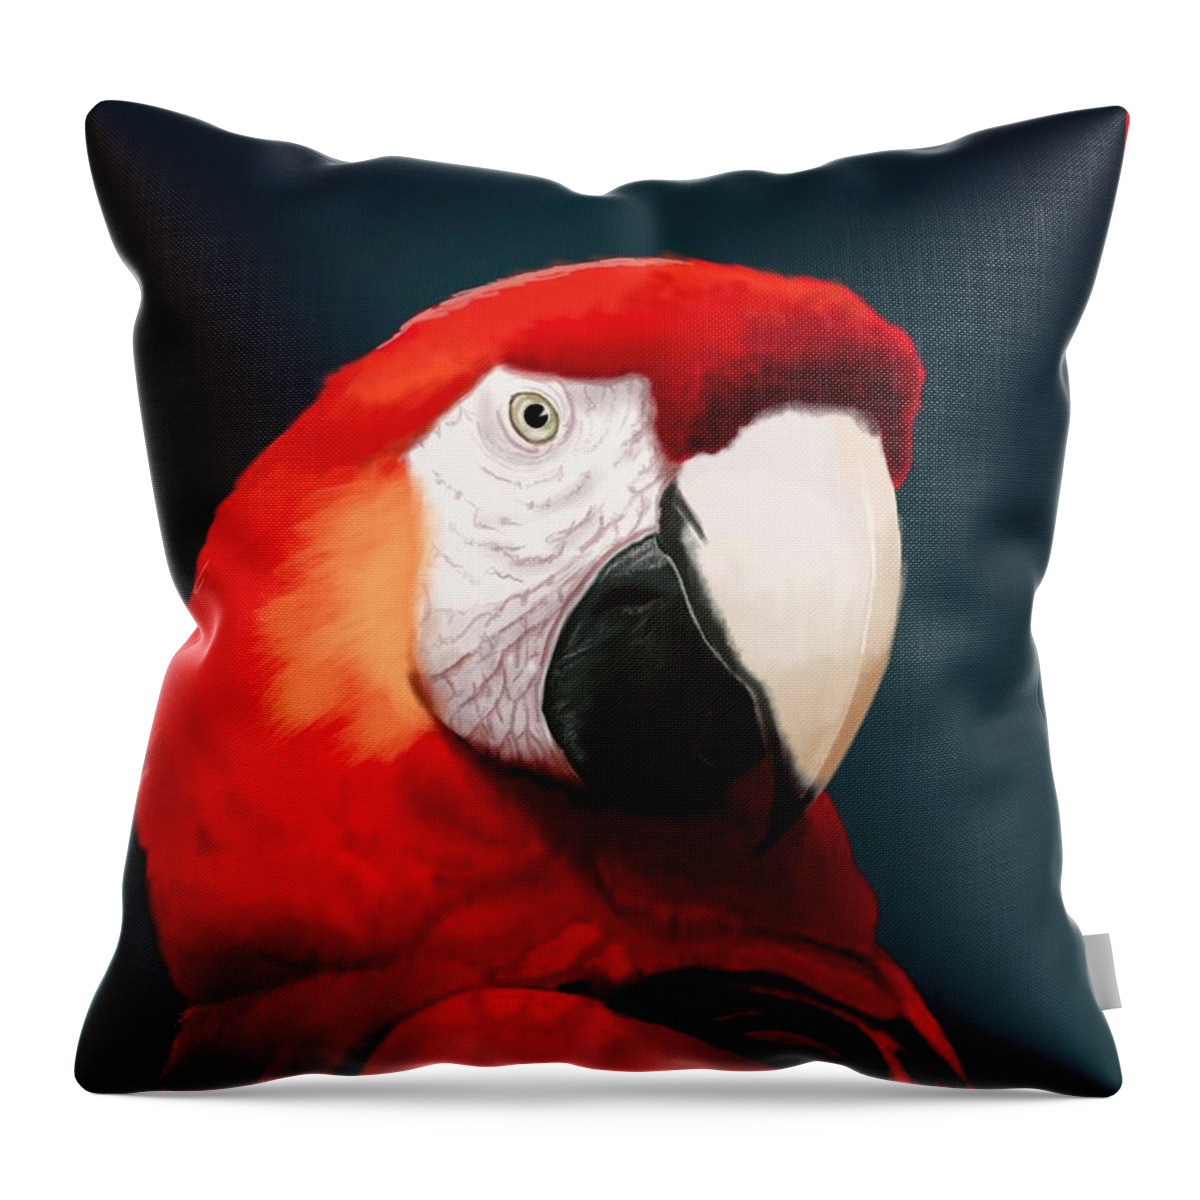 Scarlet Macaw Throw Pillow featuring the digital art Scarlet Macaw by KC Gillies